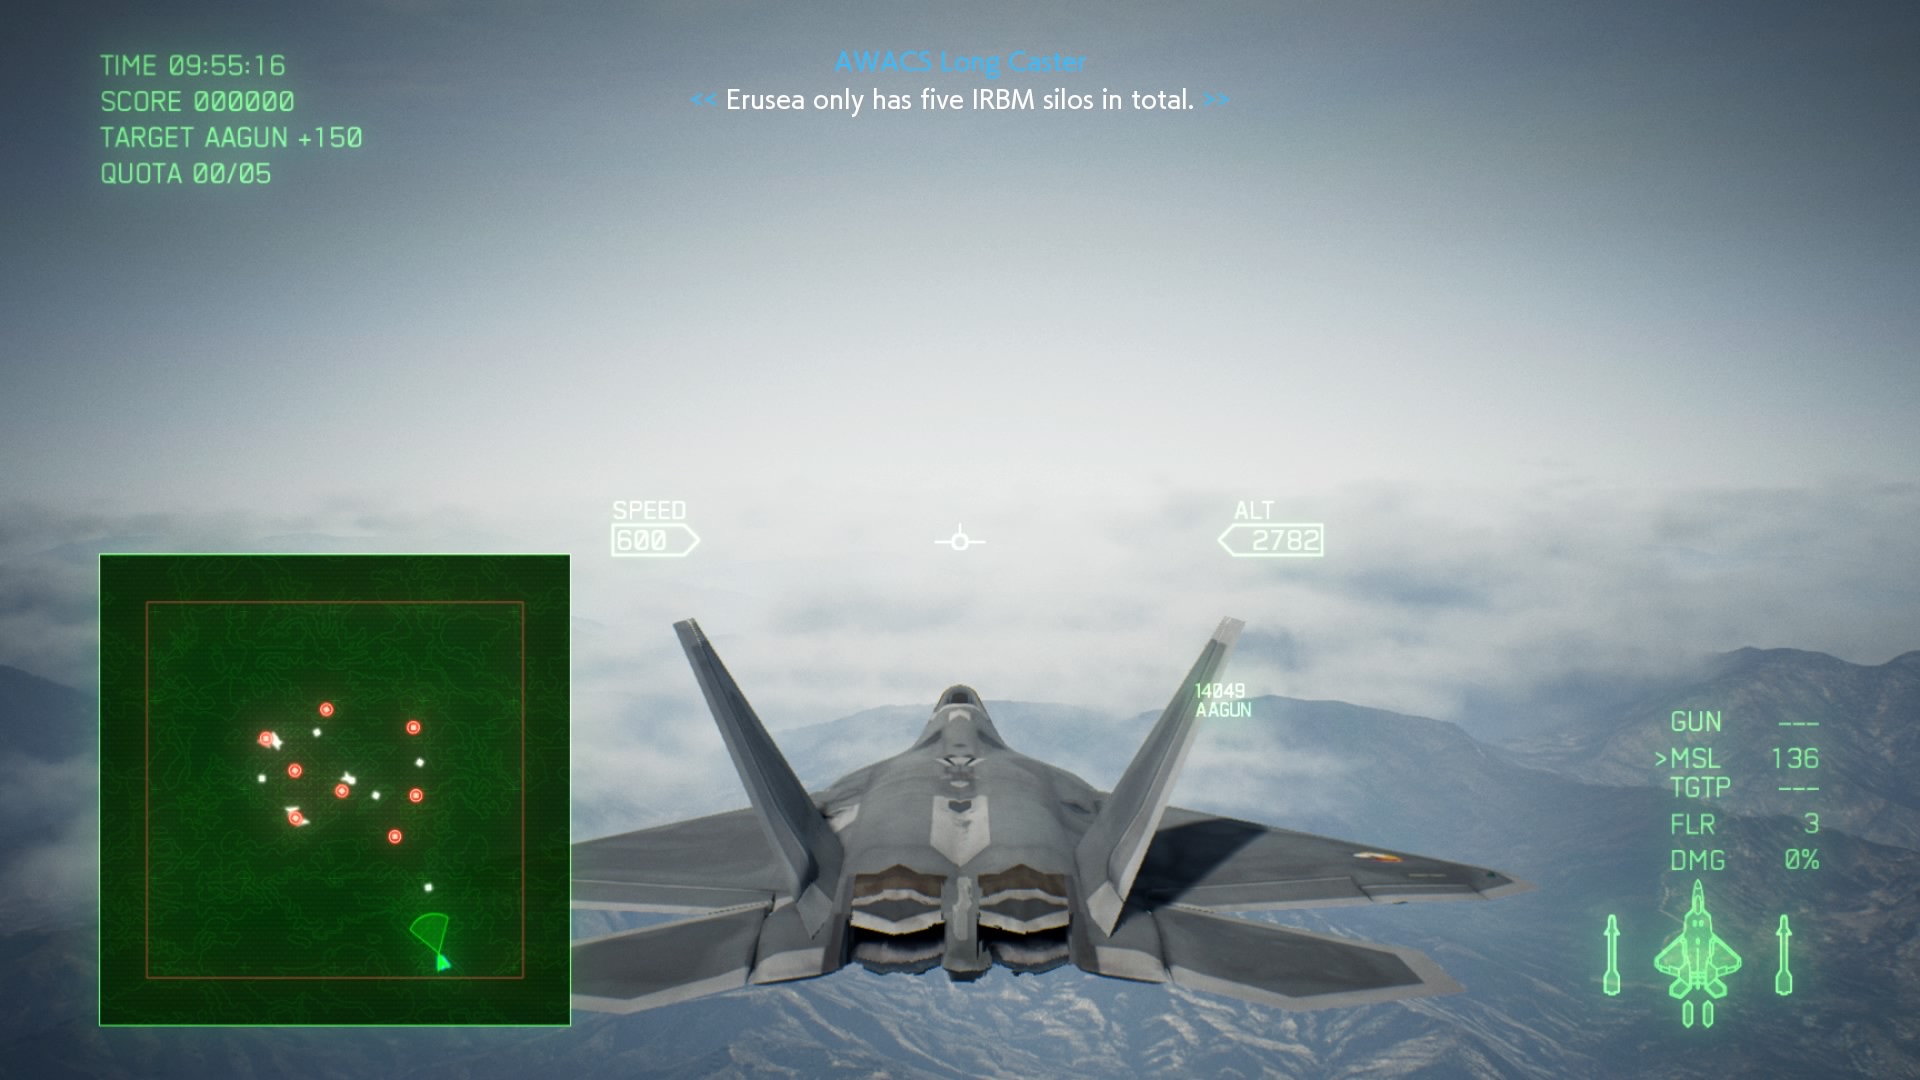 Ace Combat 7: Skies Unknown PlayStation 4 Cheats, Tips and Strategy